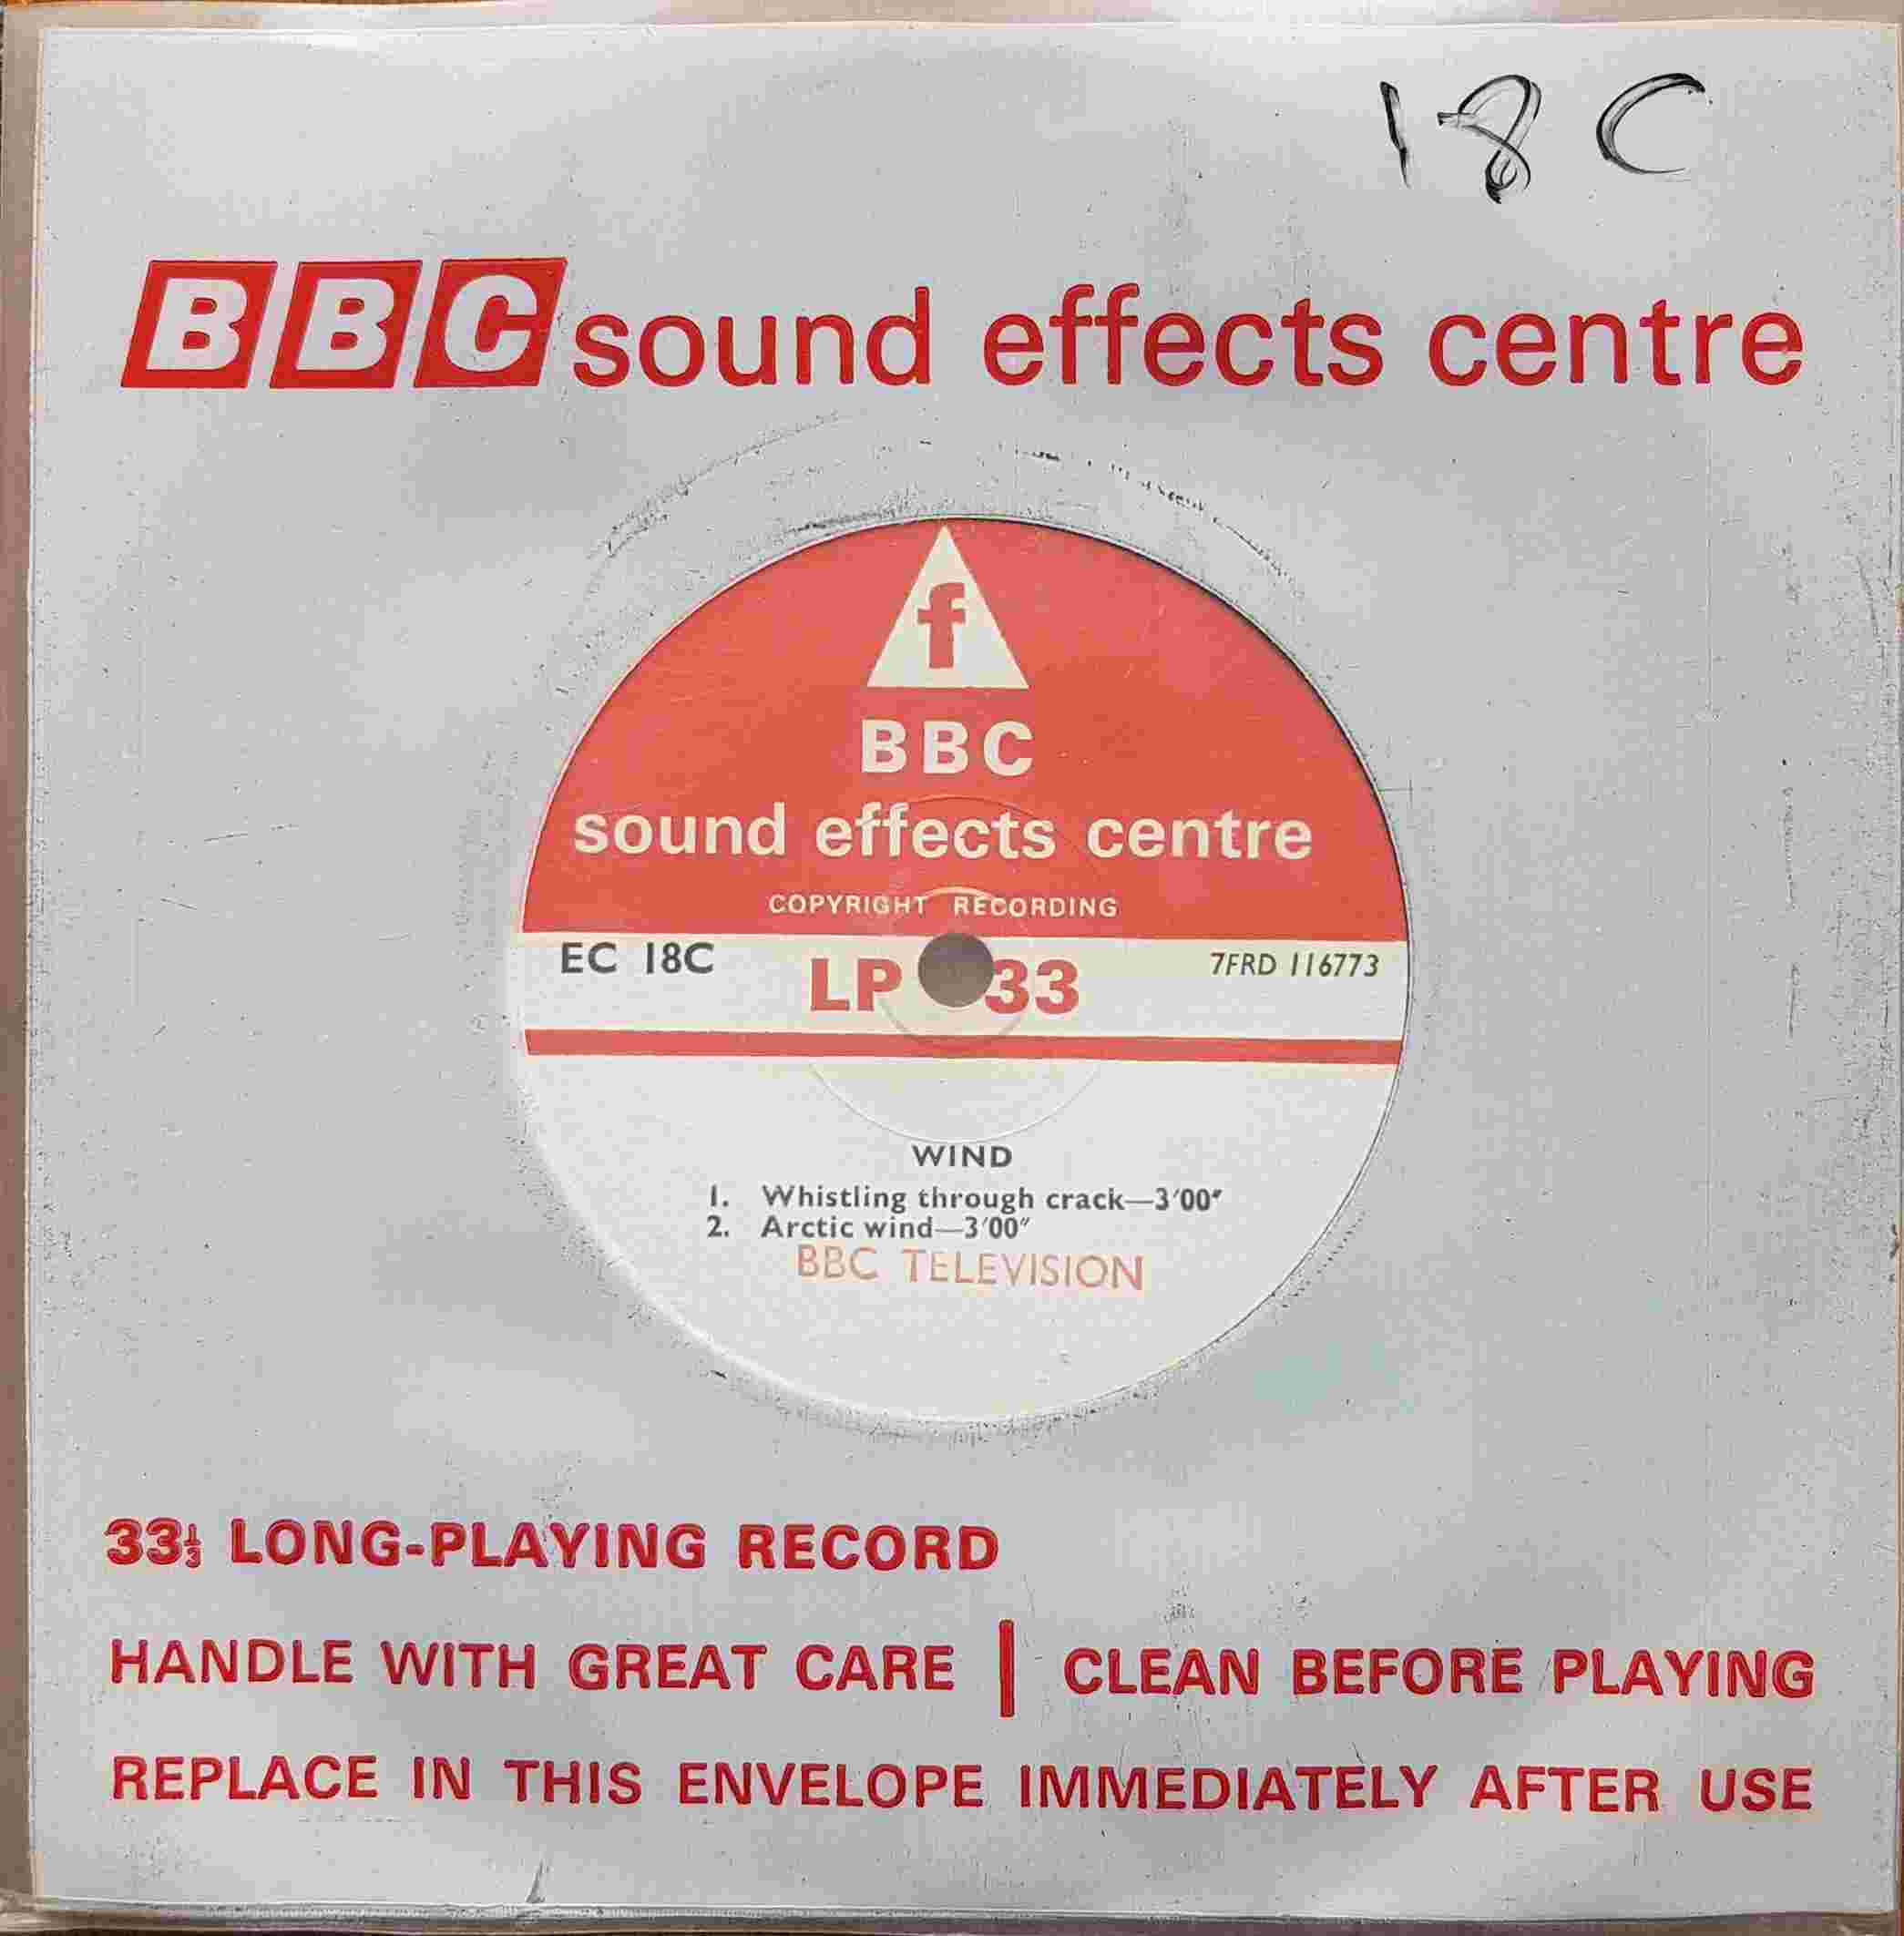 Picture of EC 18C Wind by artist Not registered from the BBC singles - Records and Tapes library